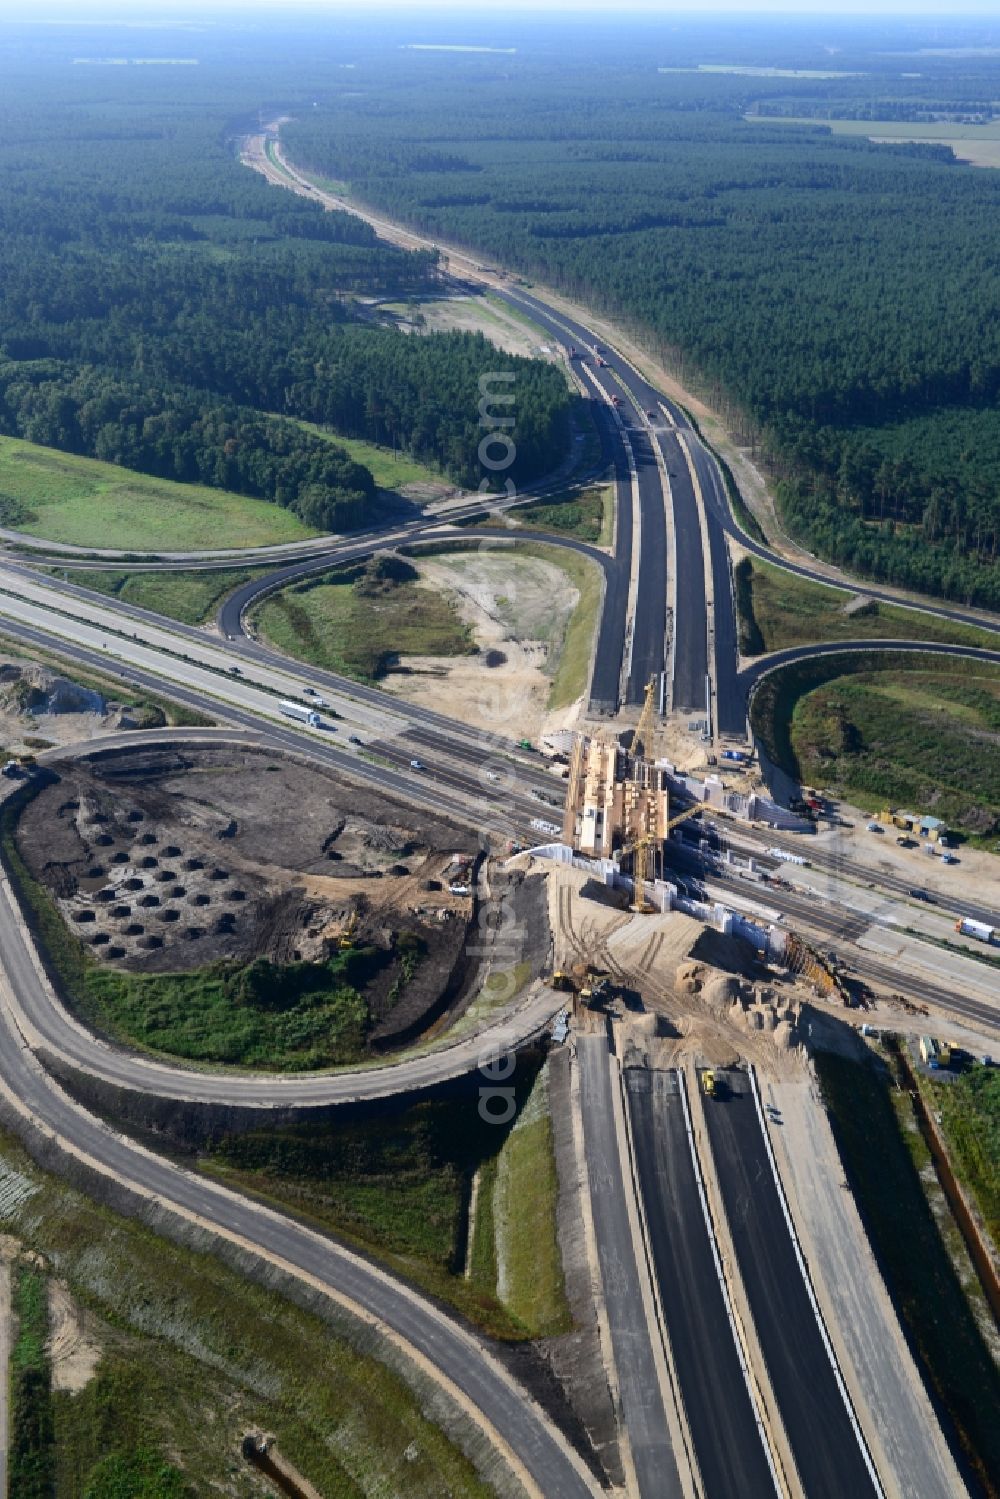 Aerial image Wöbbelin - Expansion and construction site of the highway triangle Schwerin on the motorway BAB A14 and A24 at Wöbbelin in Mecklenburg - Western Pomerania